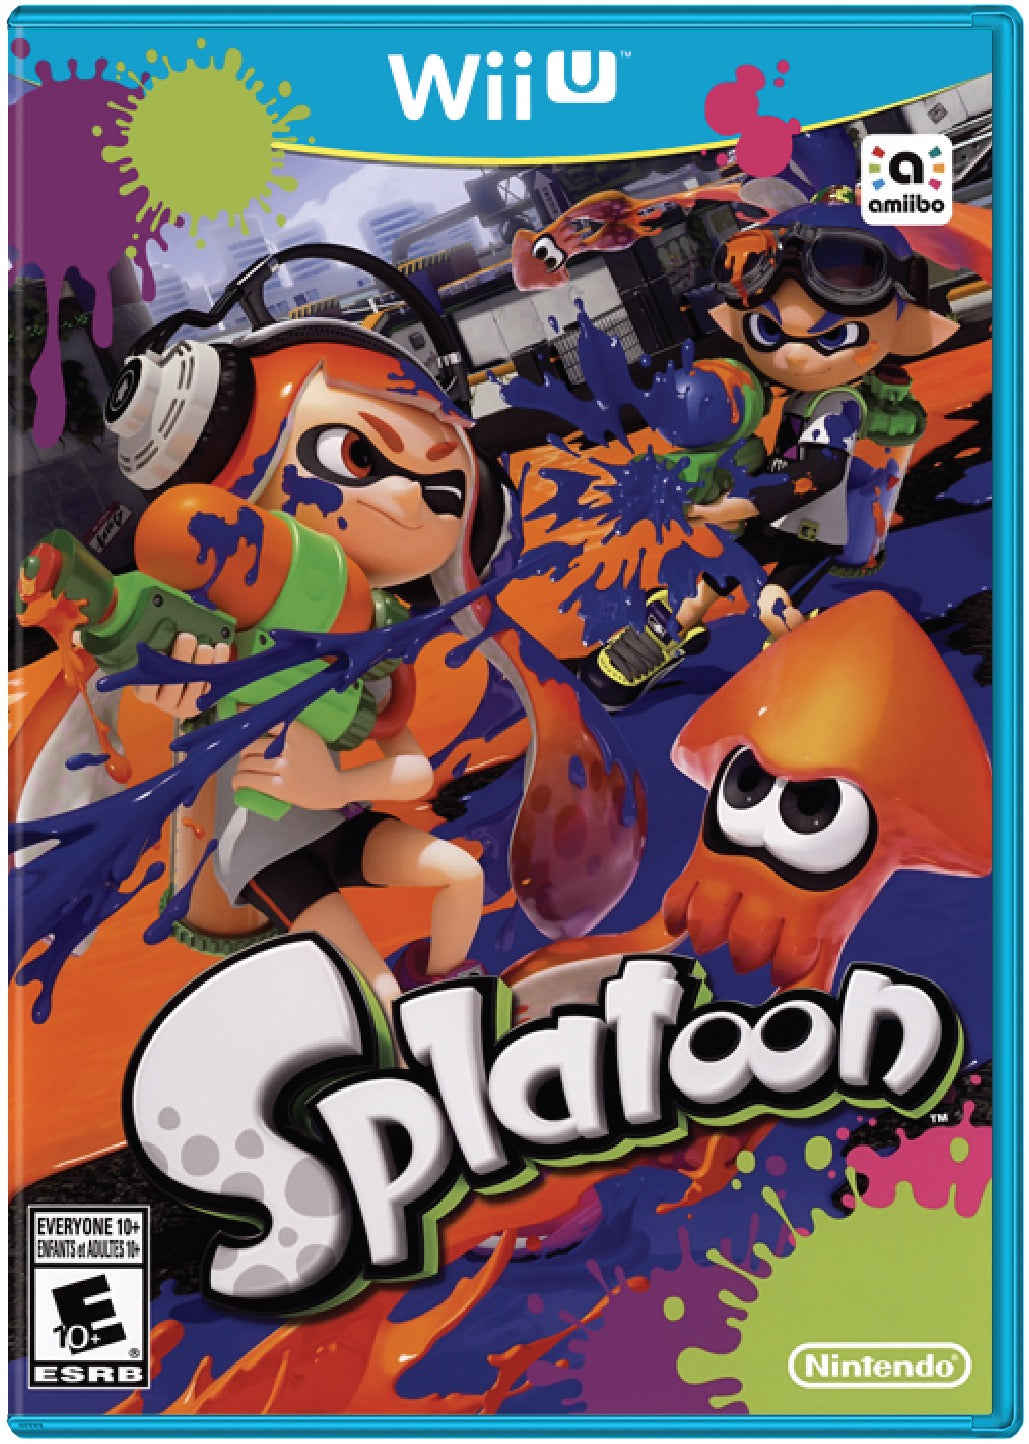 Splatoon Cover Art and Product Photo